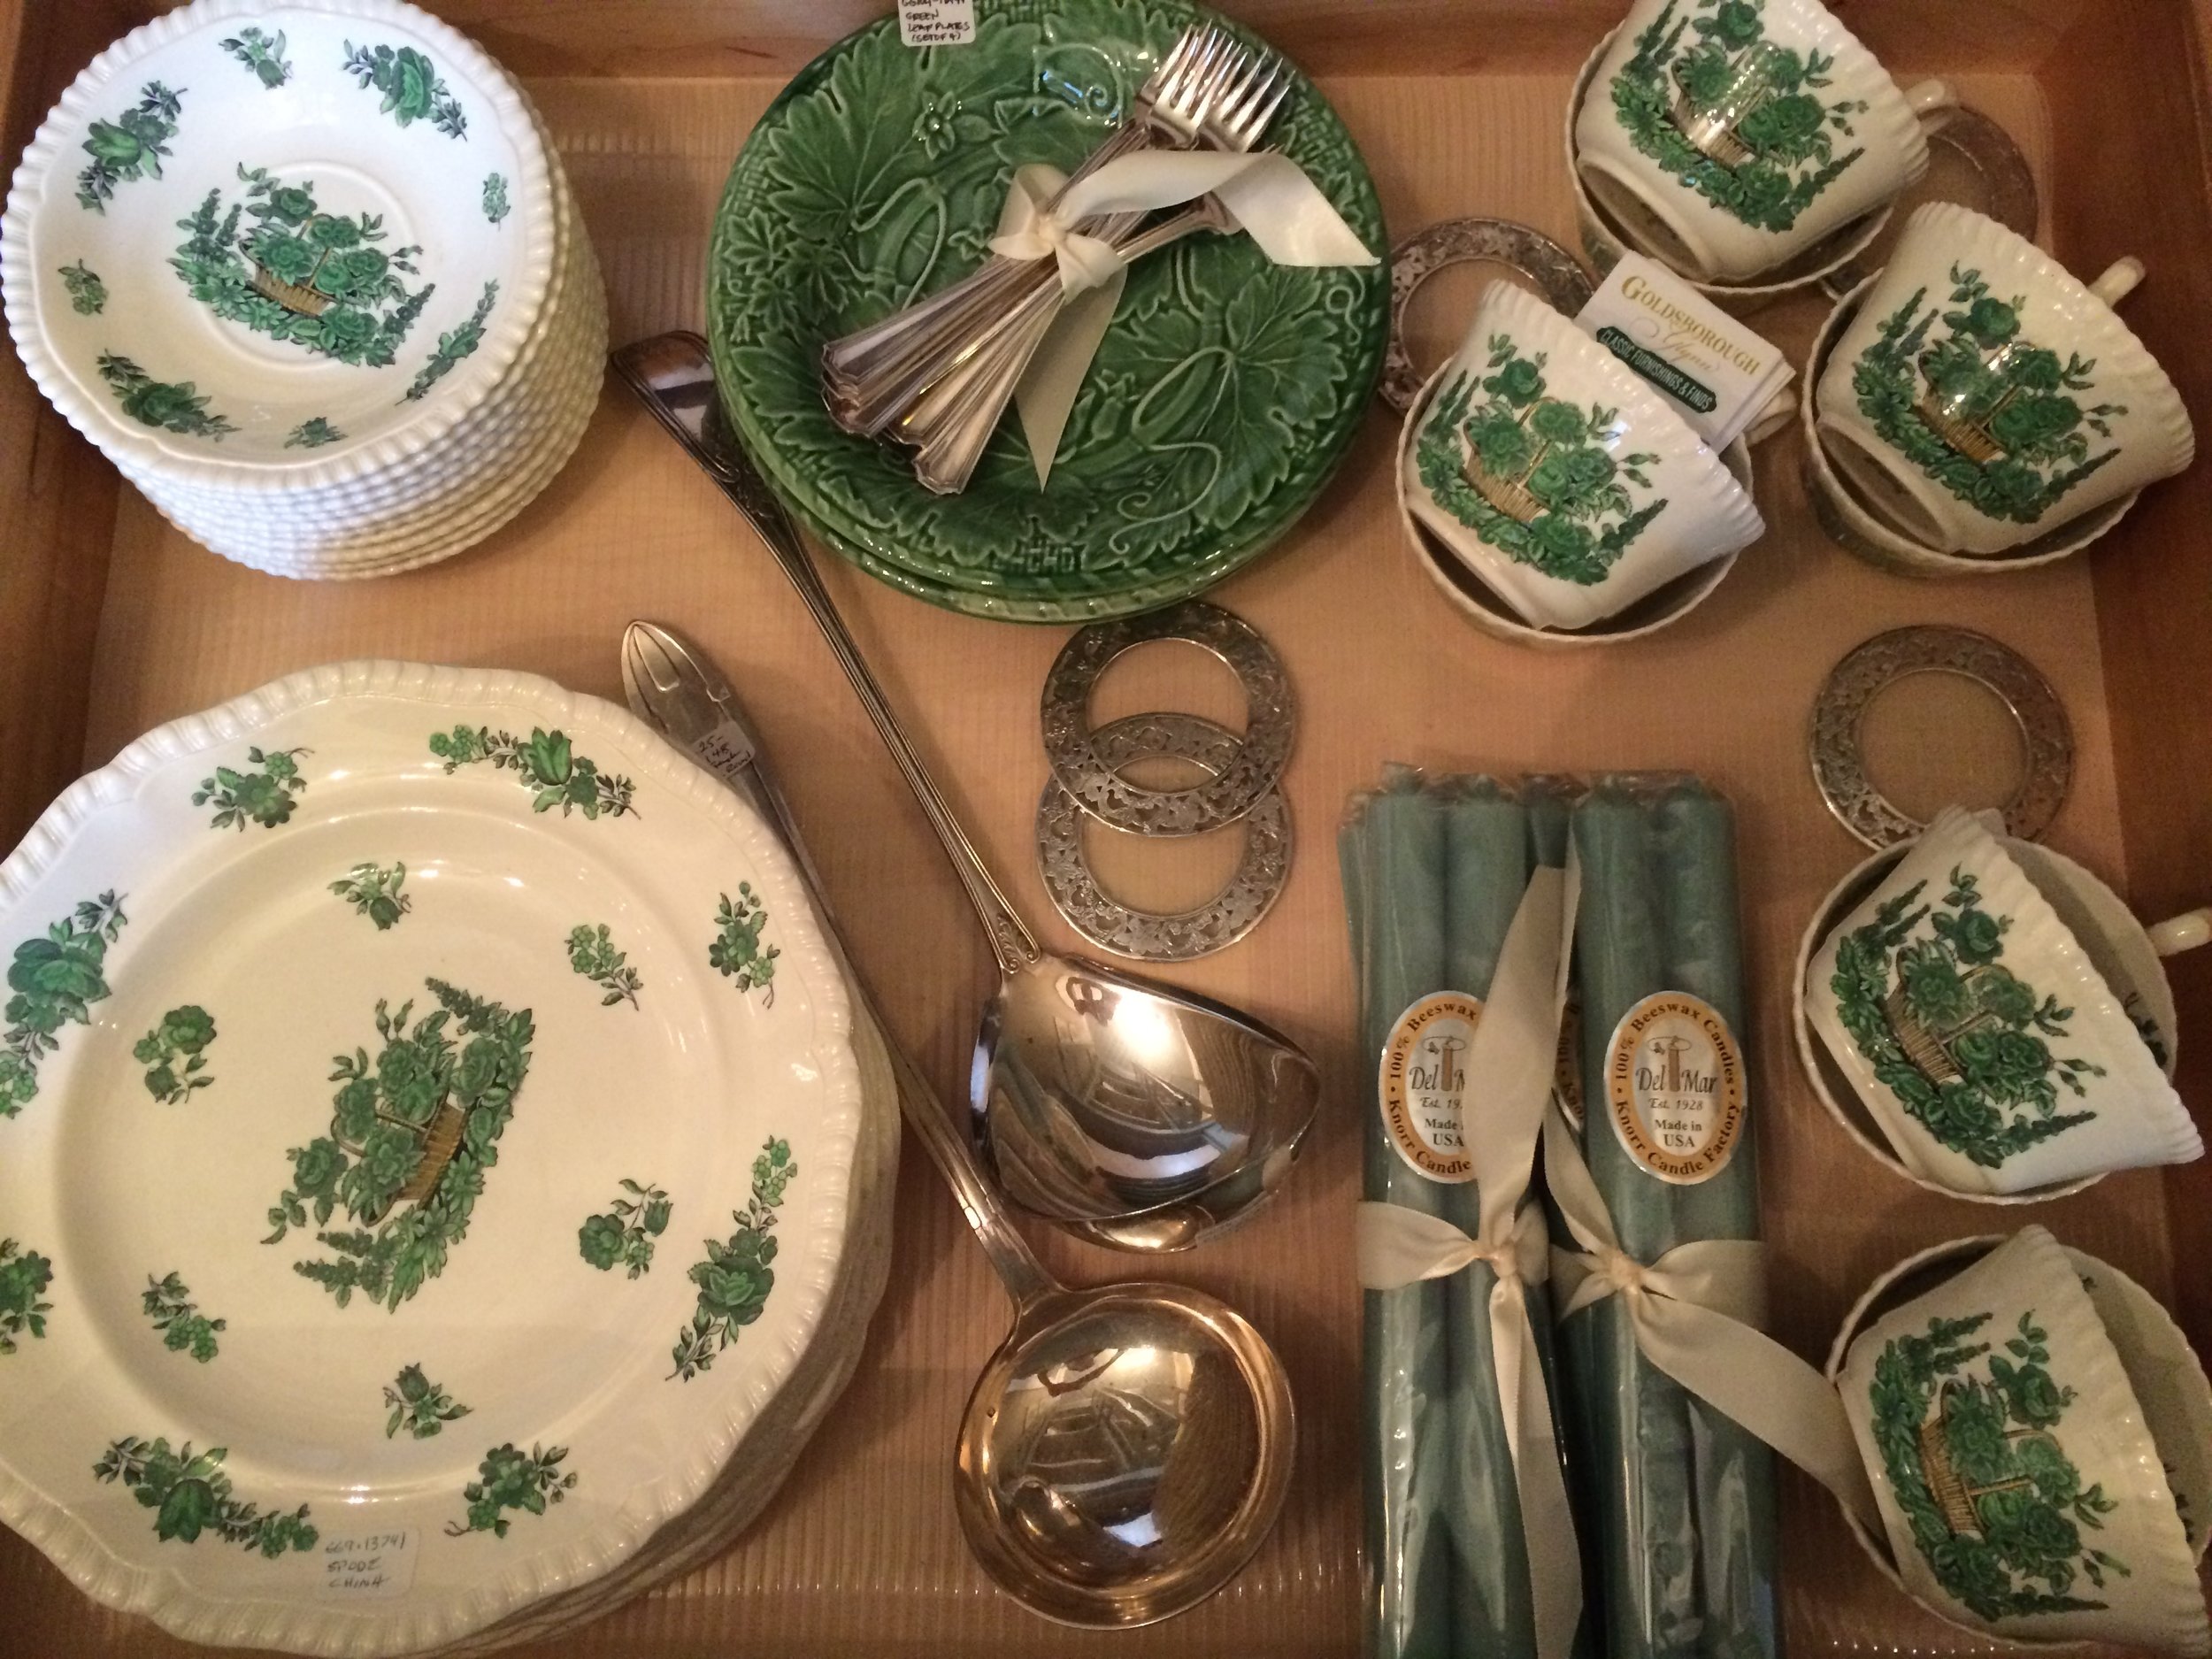 A drawer full of Spode china, various silver-plate items and Del-Mar 100% bees wax candles.